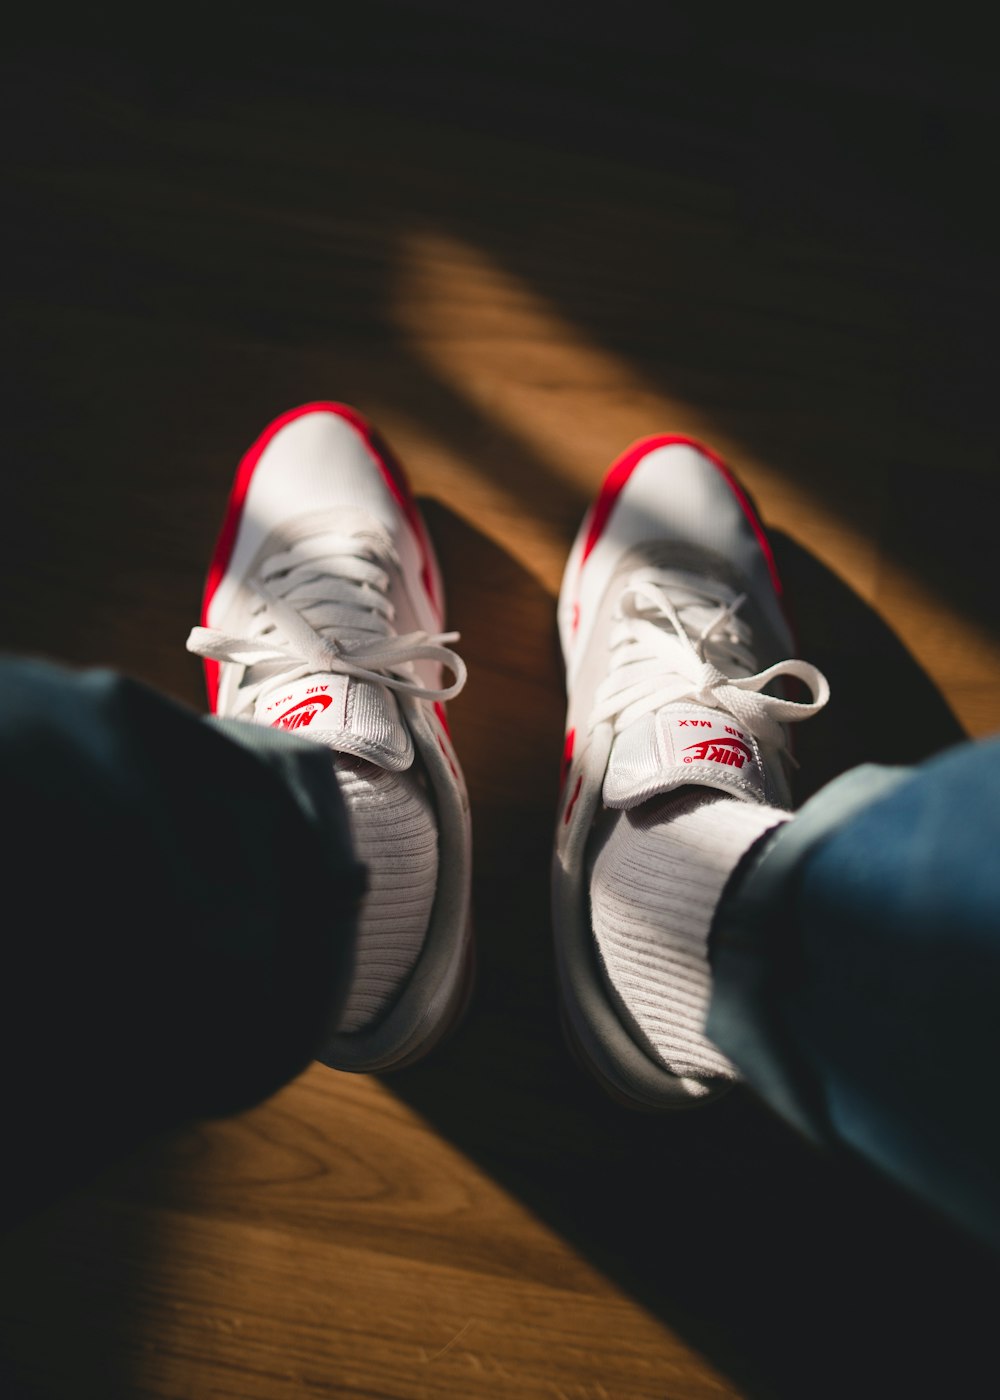 person holding white-and-red Nike running shoes photo – Free Shoe Image on  Unsplash